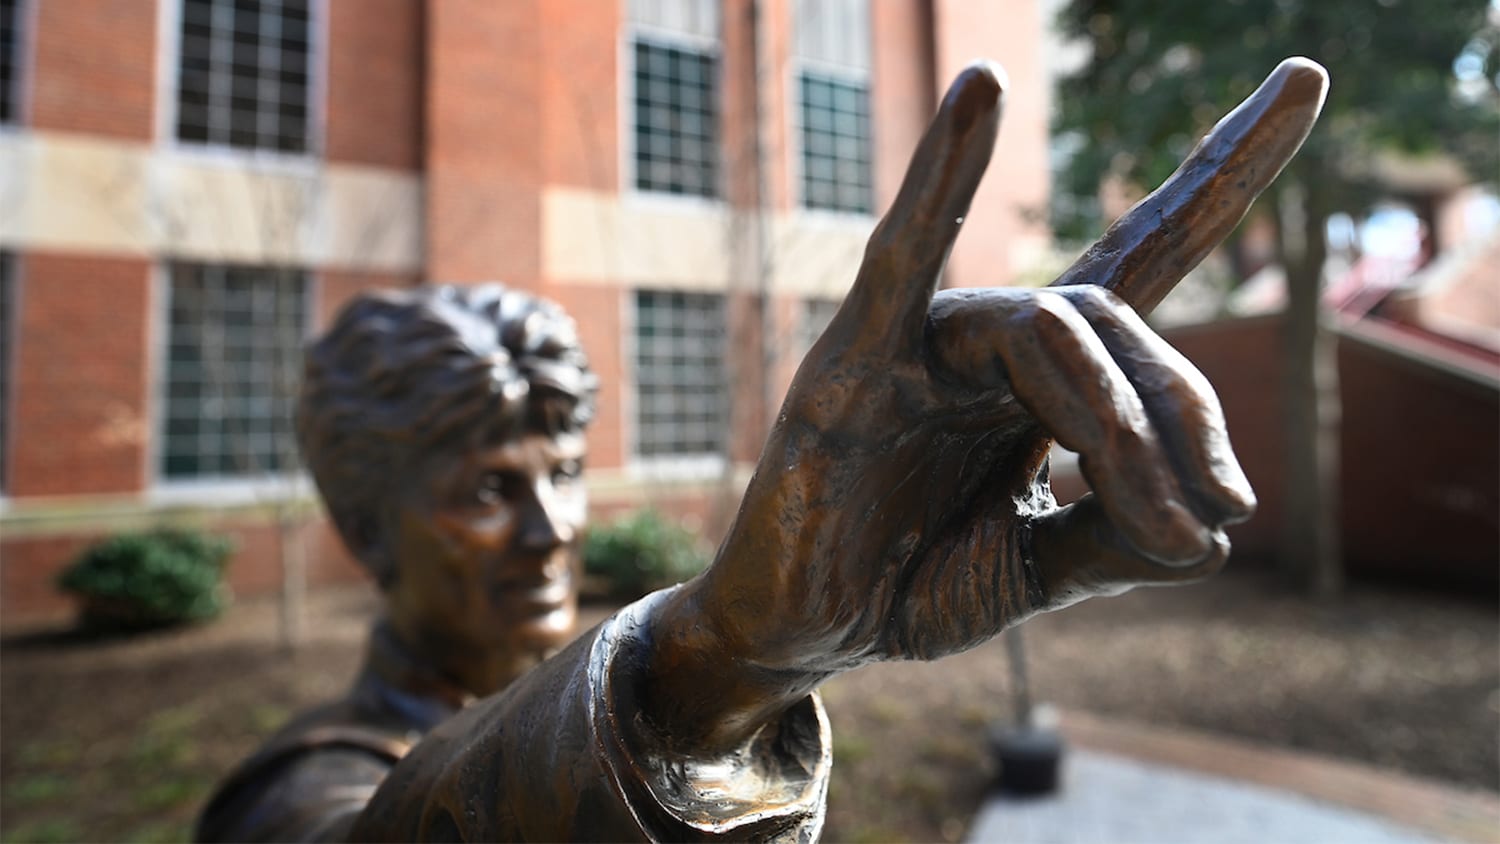 A statue of Kay Yow making wolfie sign with her fingers outside of Reynolds Coliseum